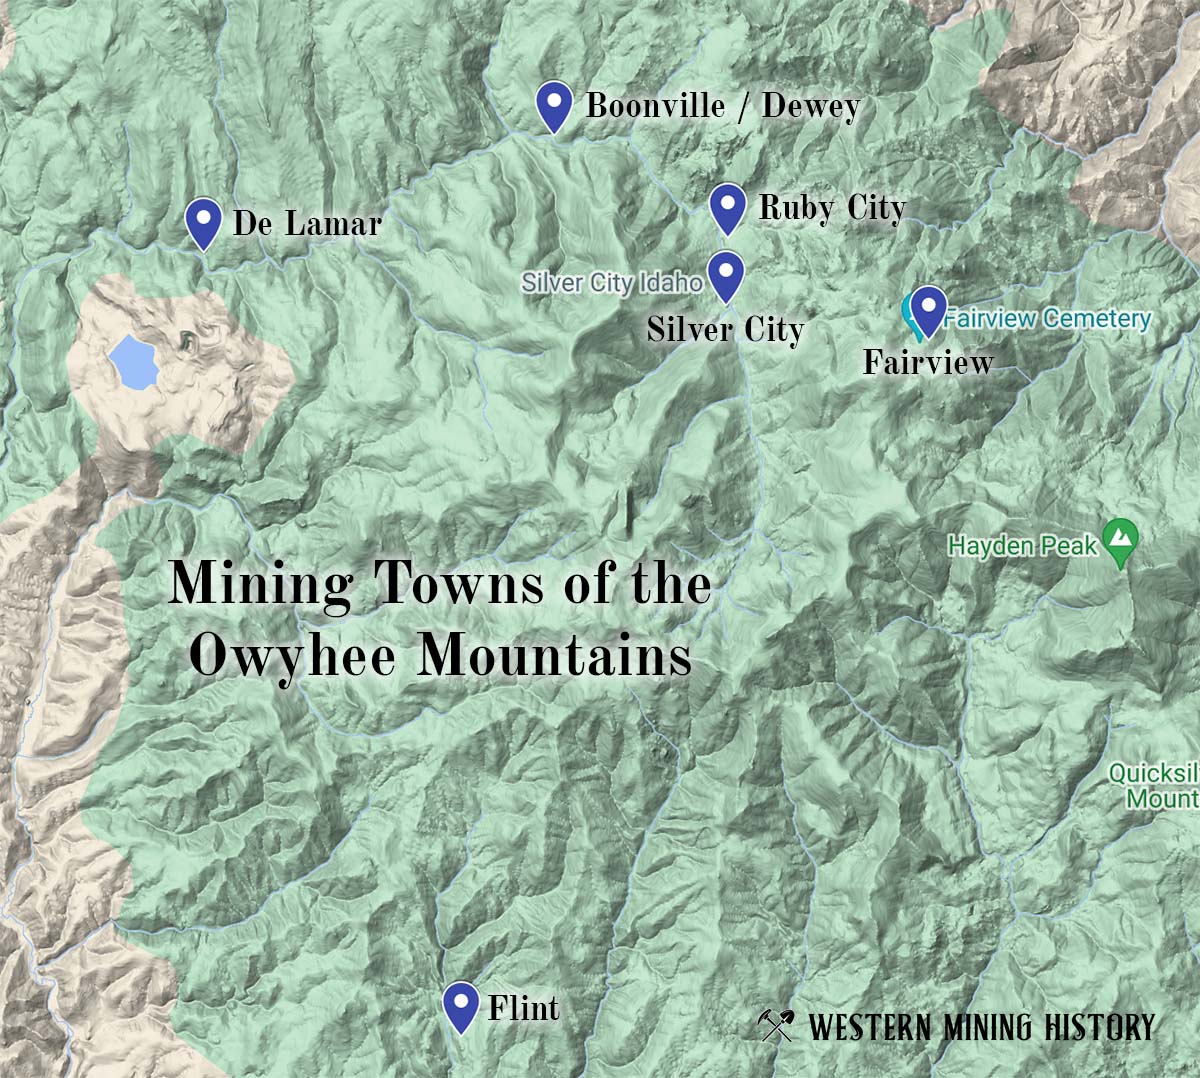 Owyhee Mountains mining towns